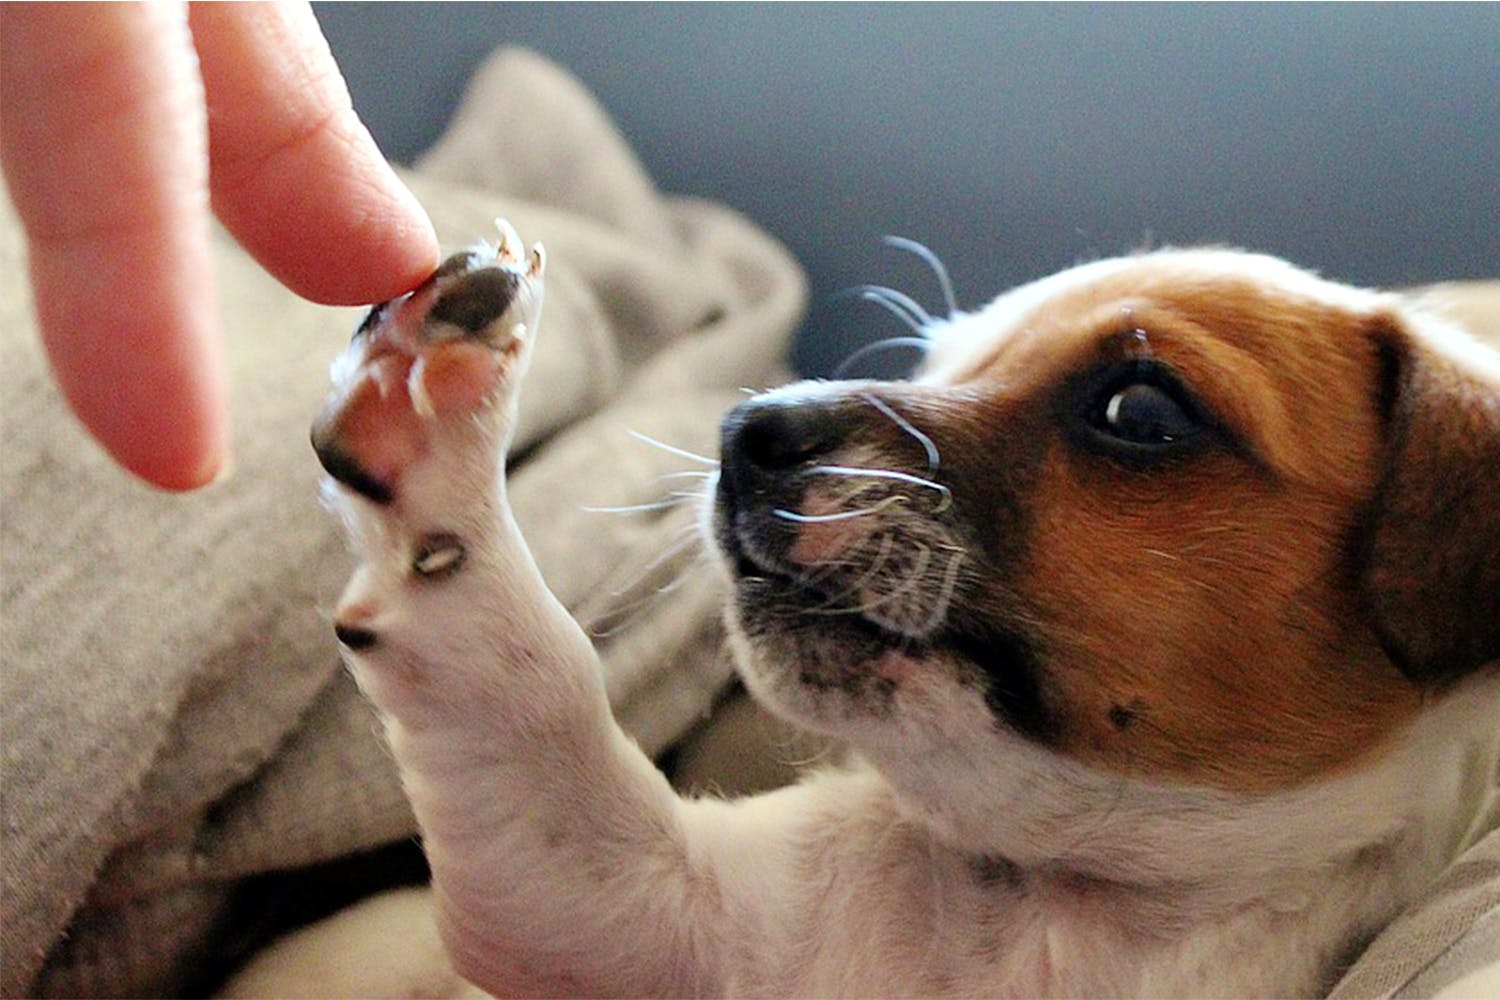 Dog,Canidae,Dog breed,Puppy,Companion dog,Carnivore,Russell terrier,Snout,Puppy love,Hand